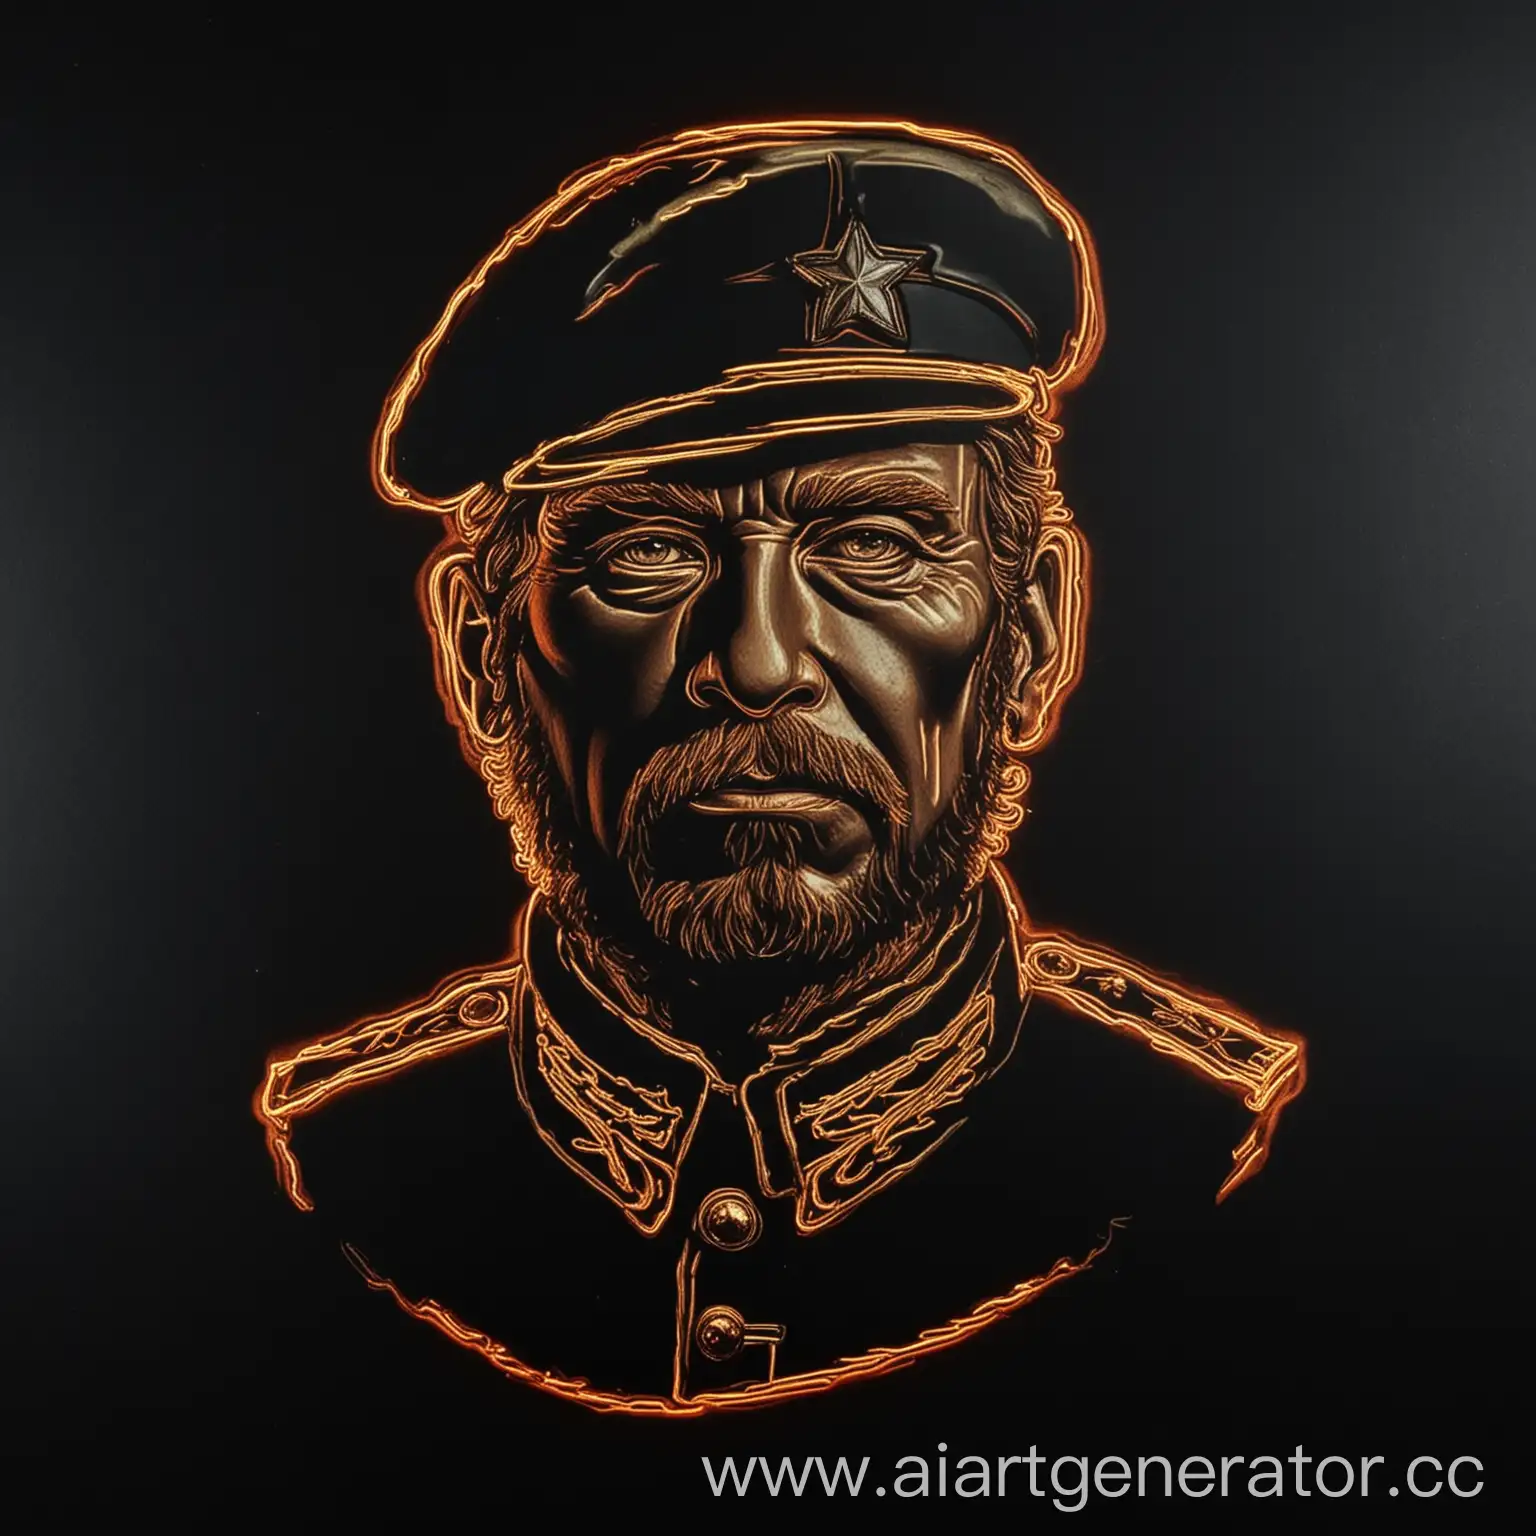 Military-Cuk-Wagner-with-Neon-Outline-on-Black-Background